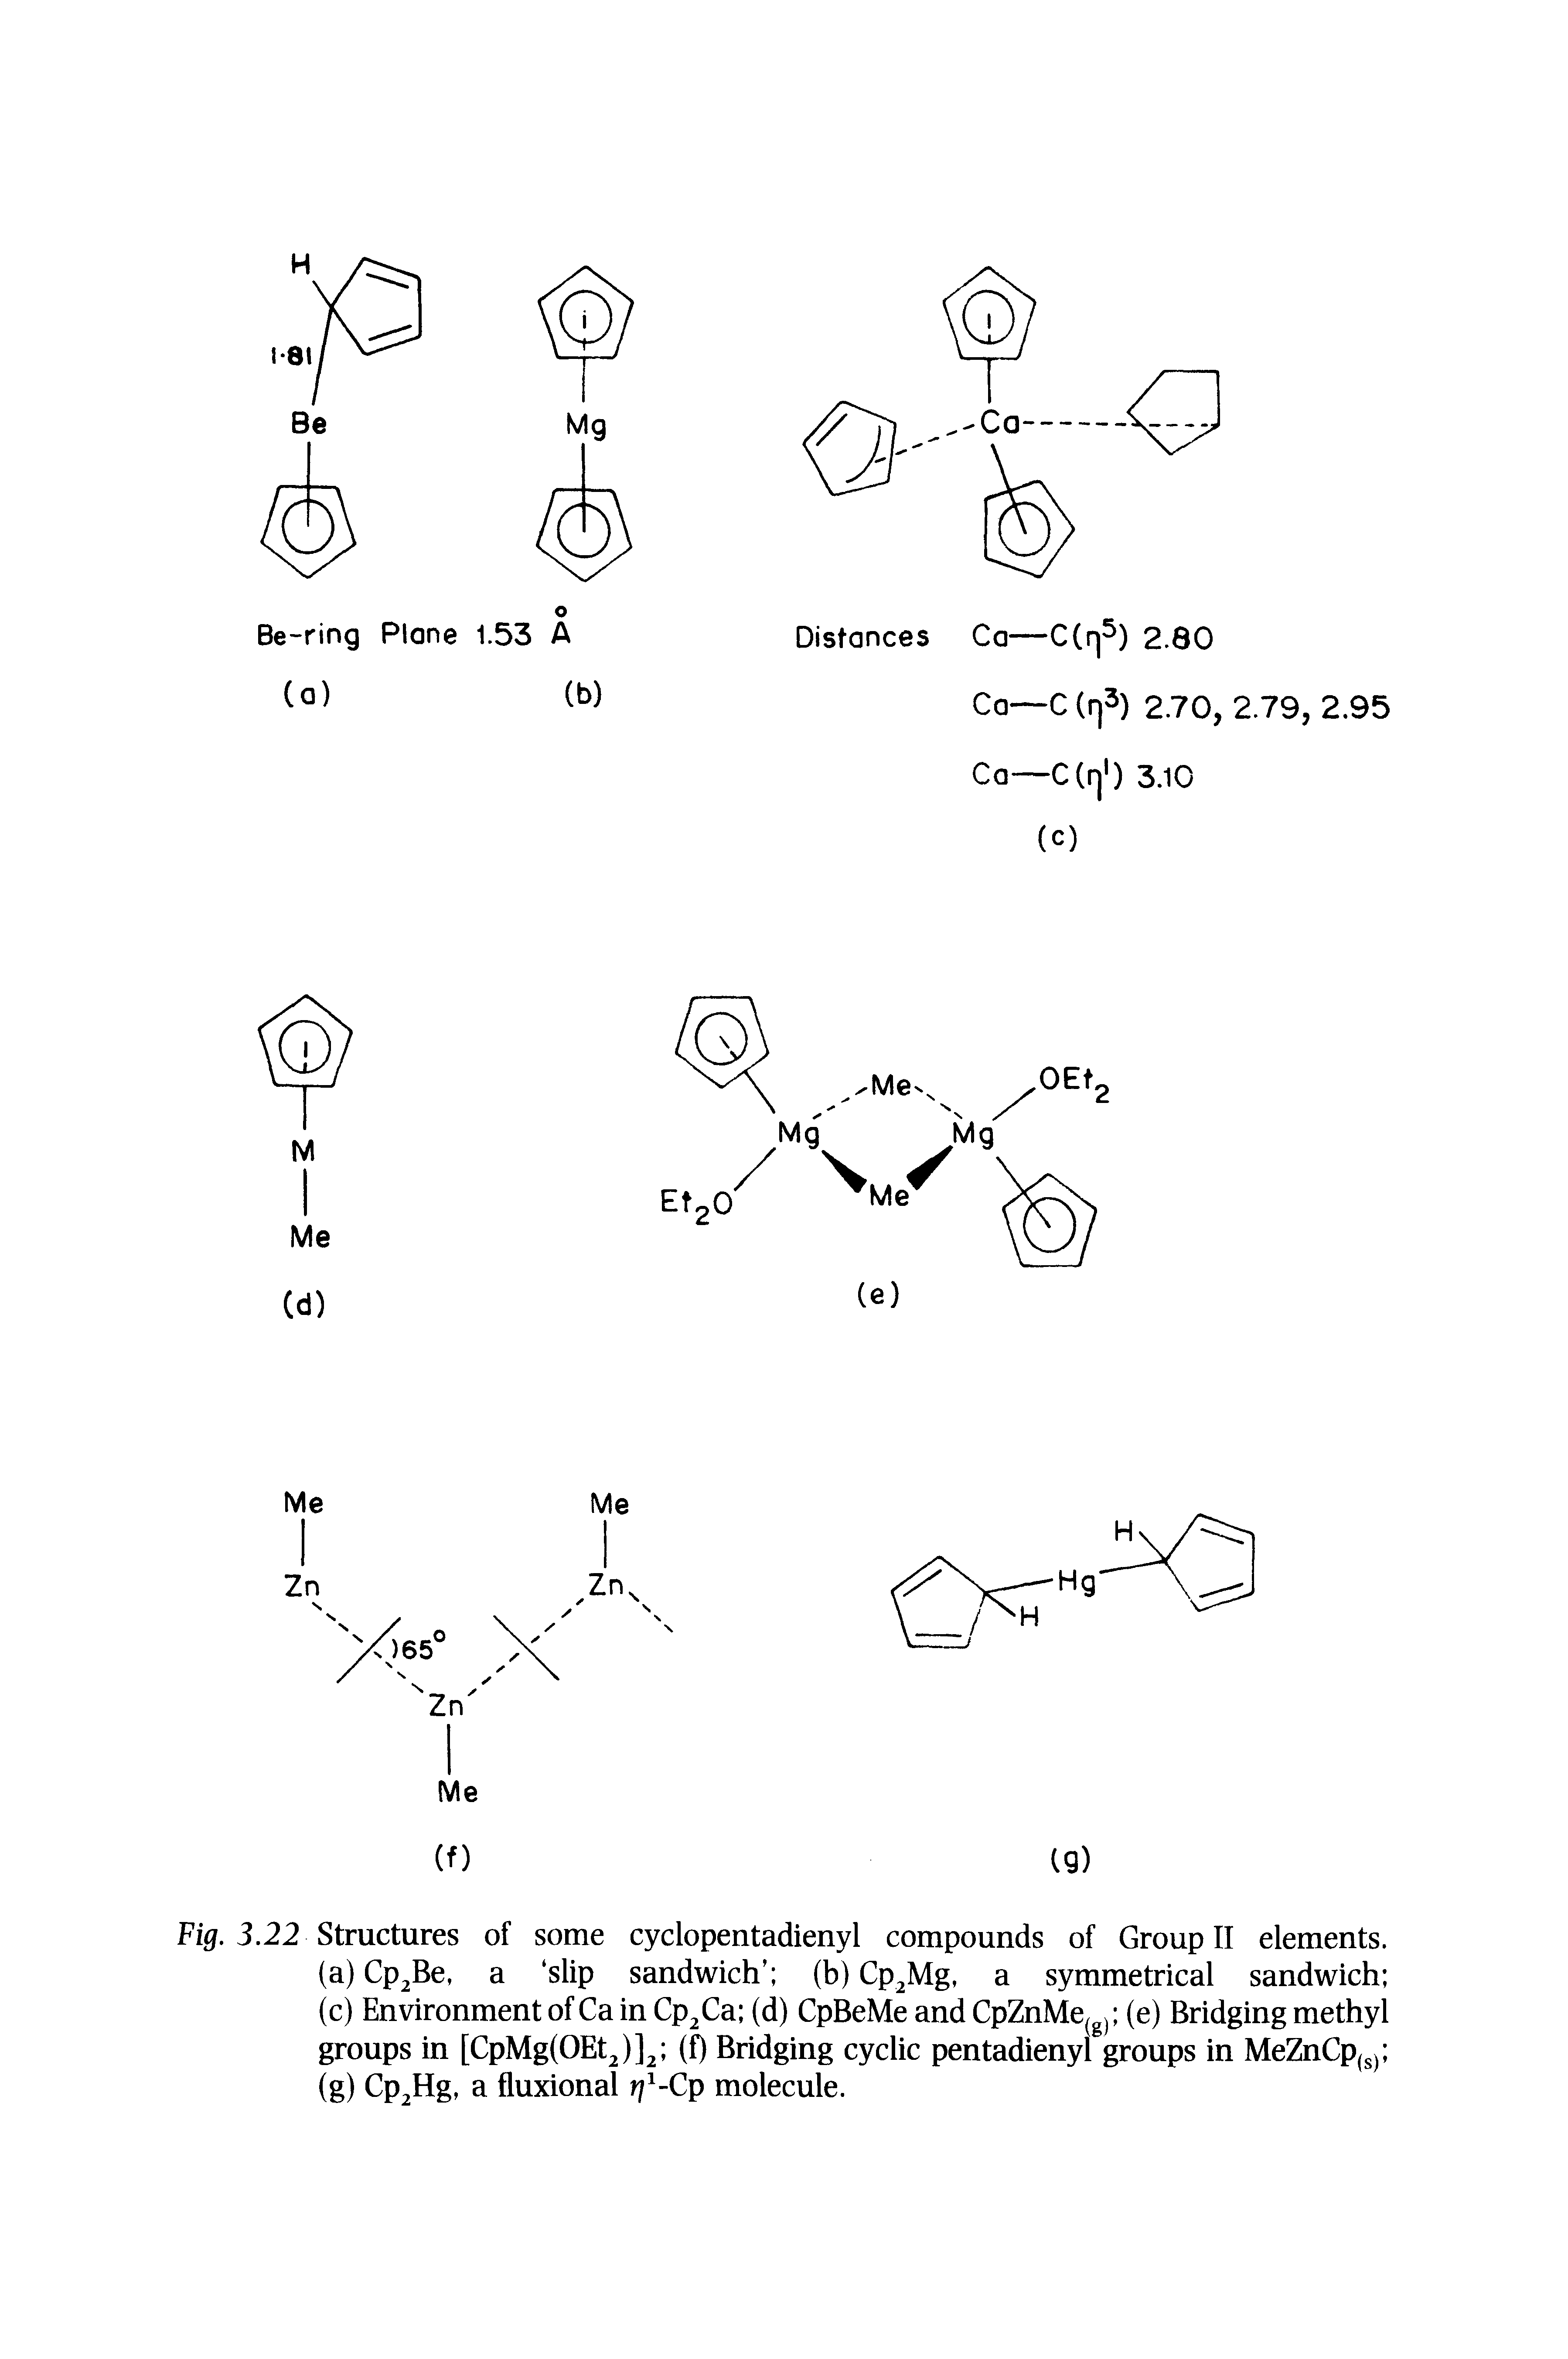 Fig. 3.22 Structures of some cyclopentadienyl compounds of Group II elements.